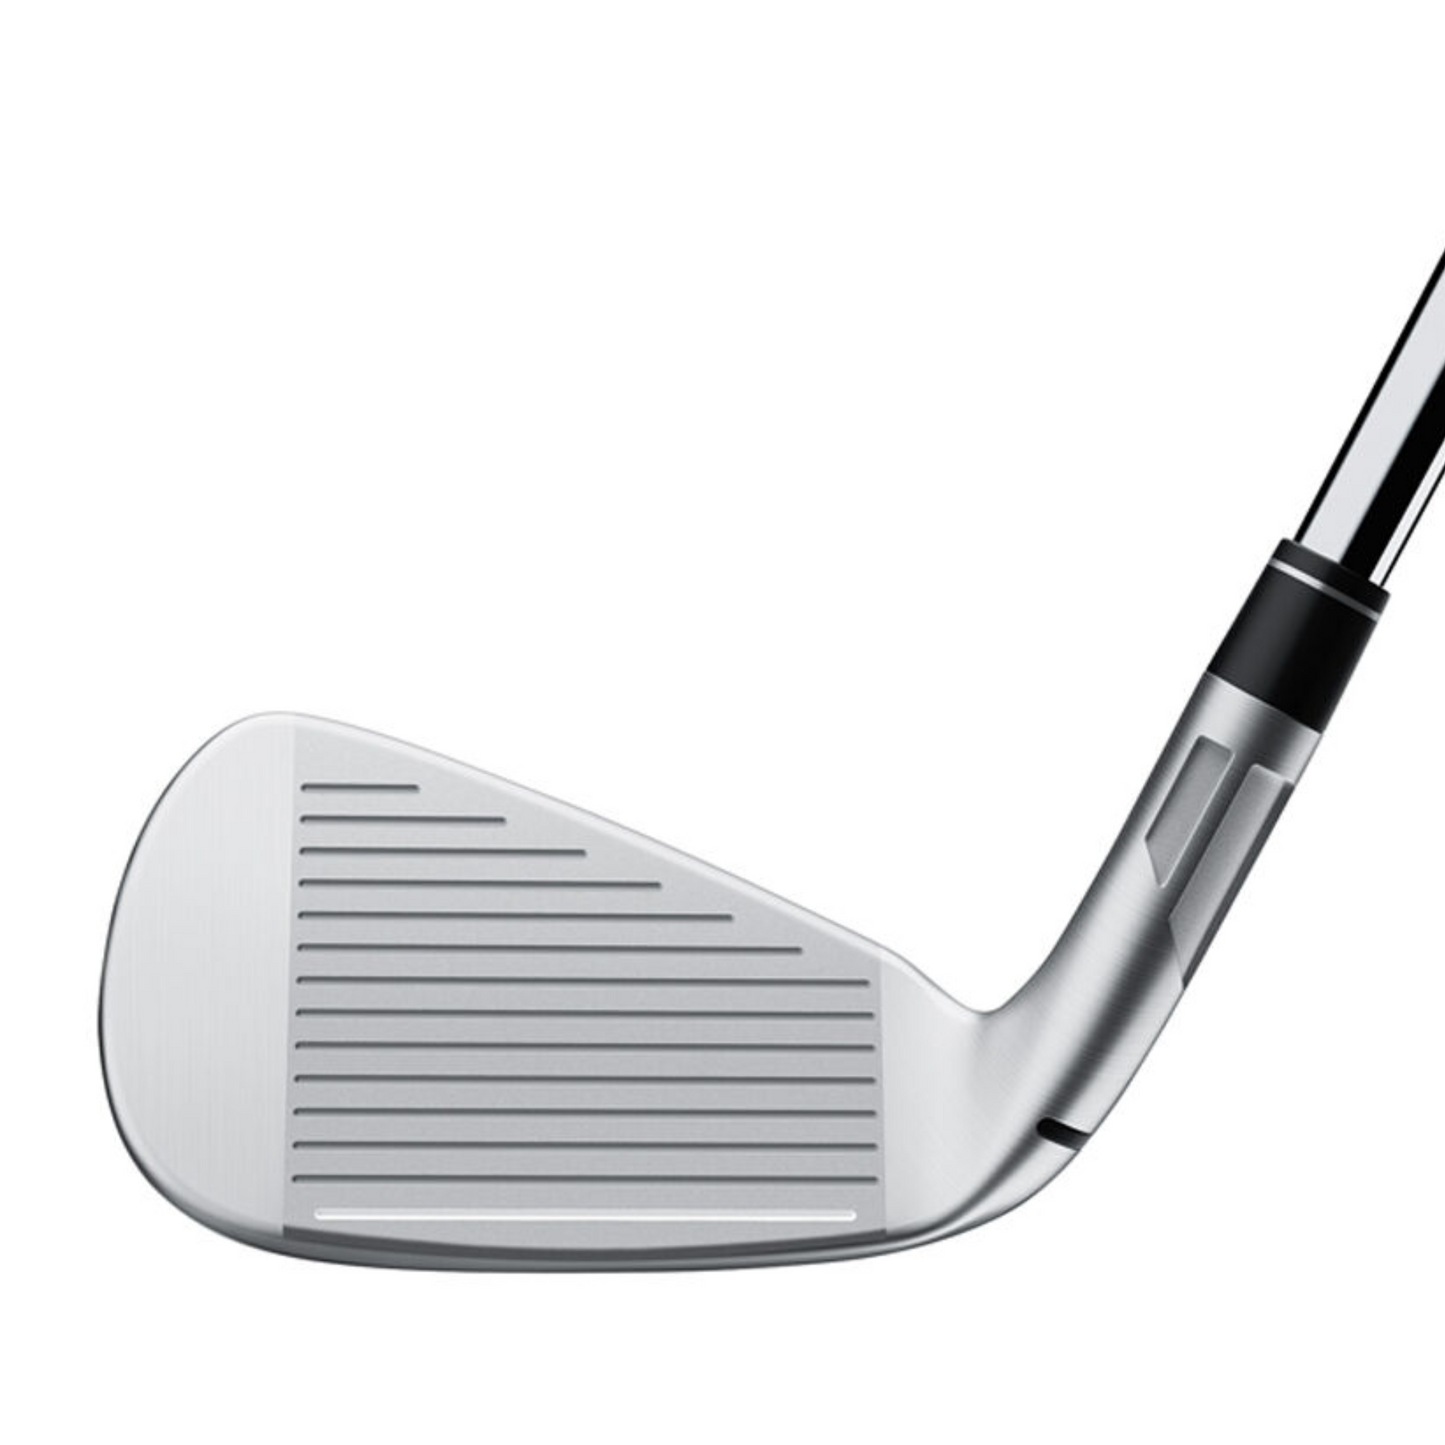 TaylorMade Golf Stealth Graphite Irons   